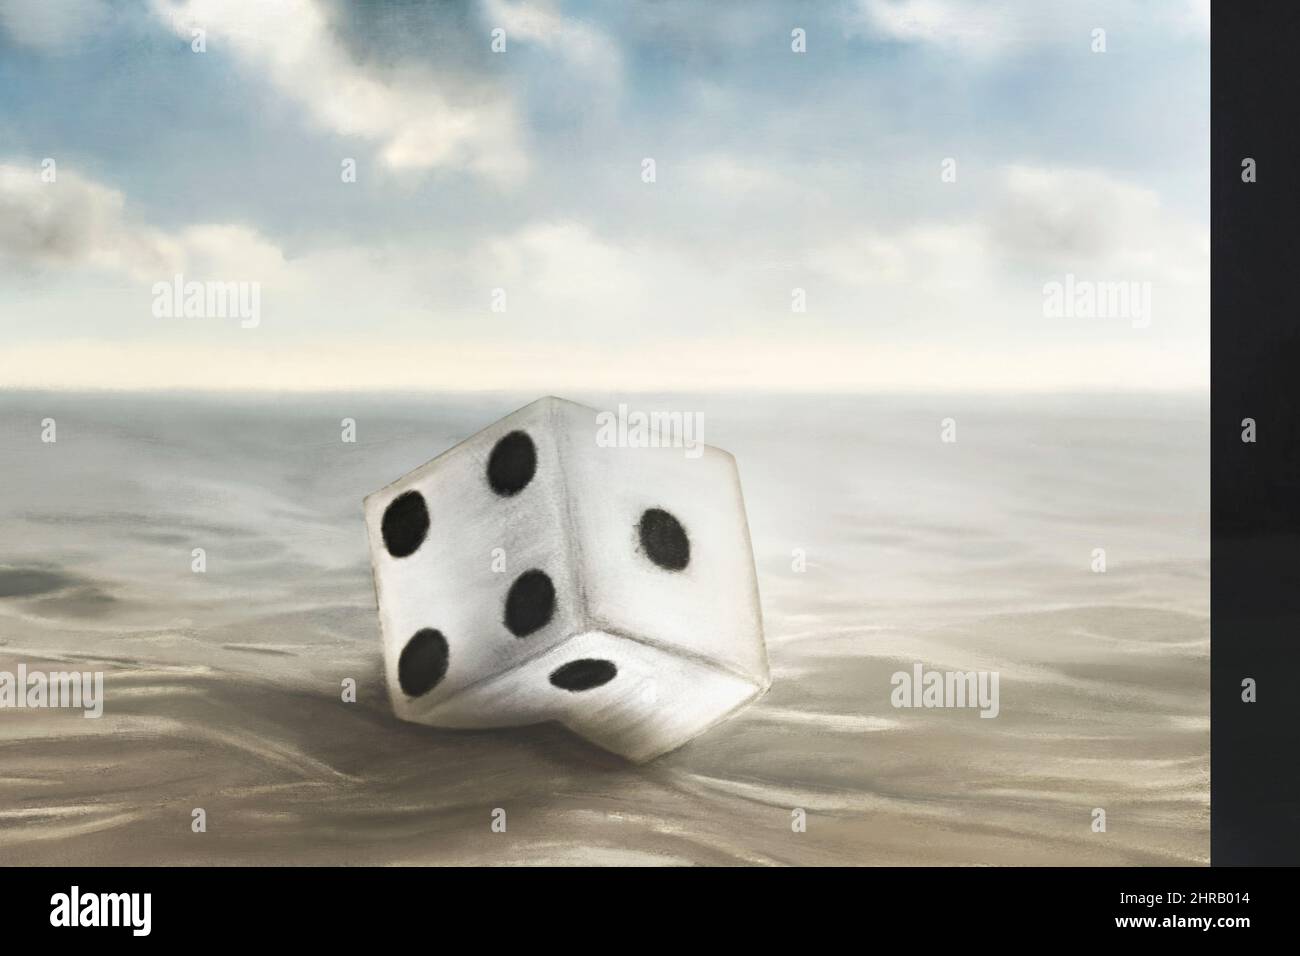 surreal dice stuck in the sand Stock Photo